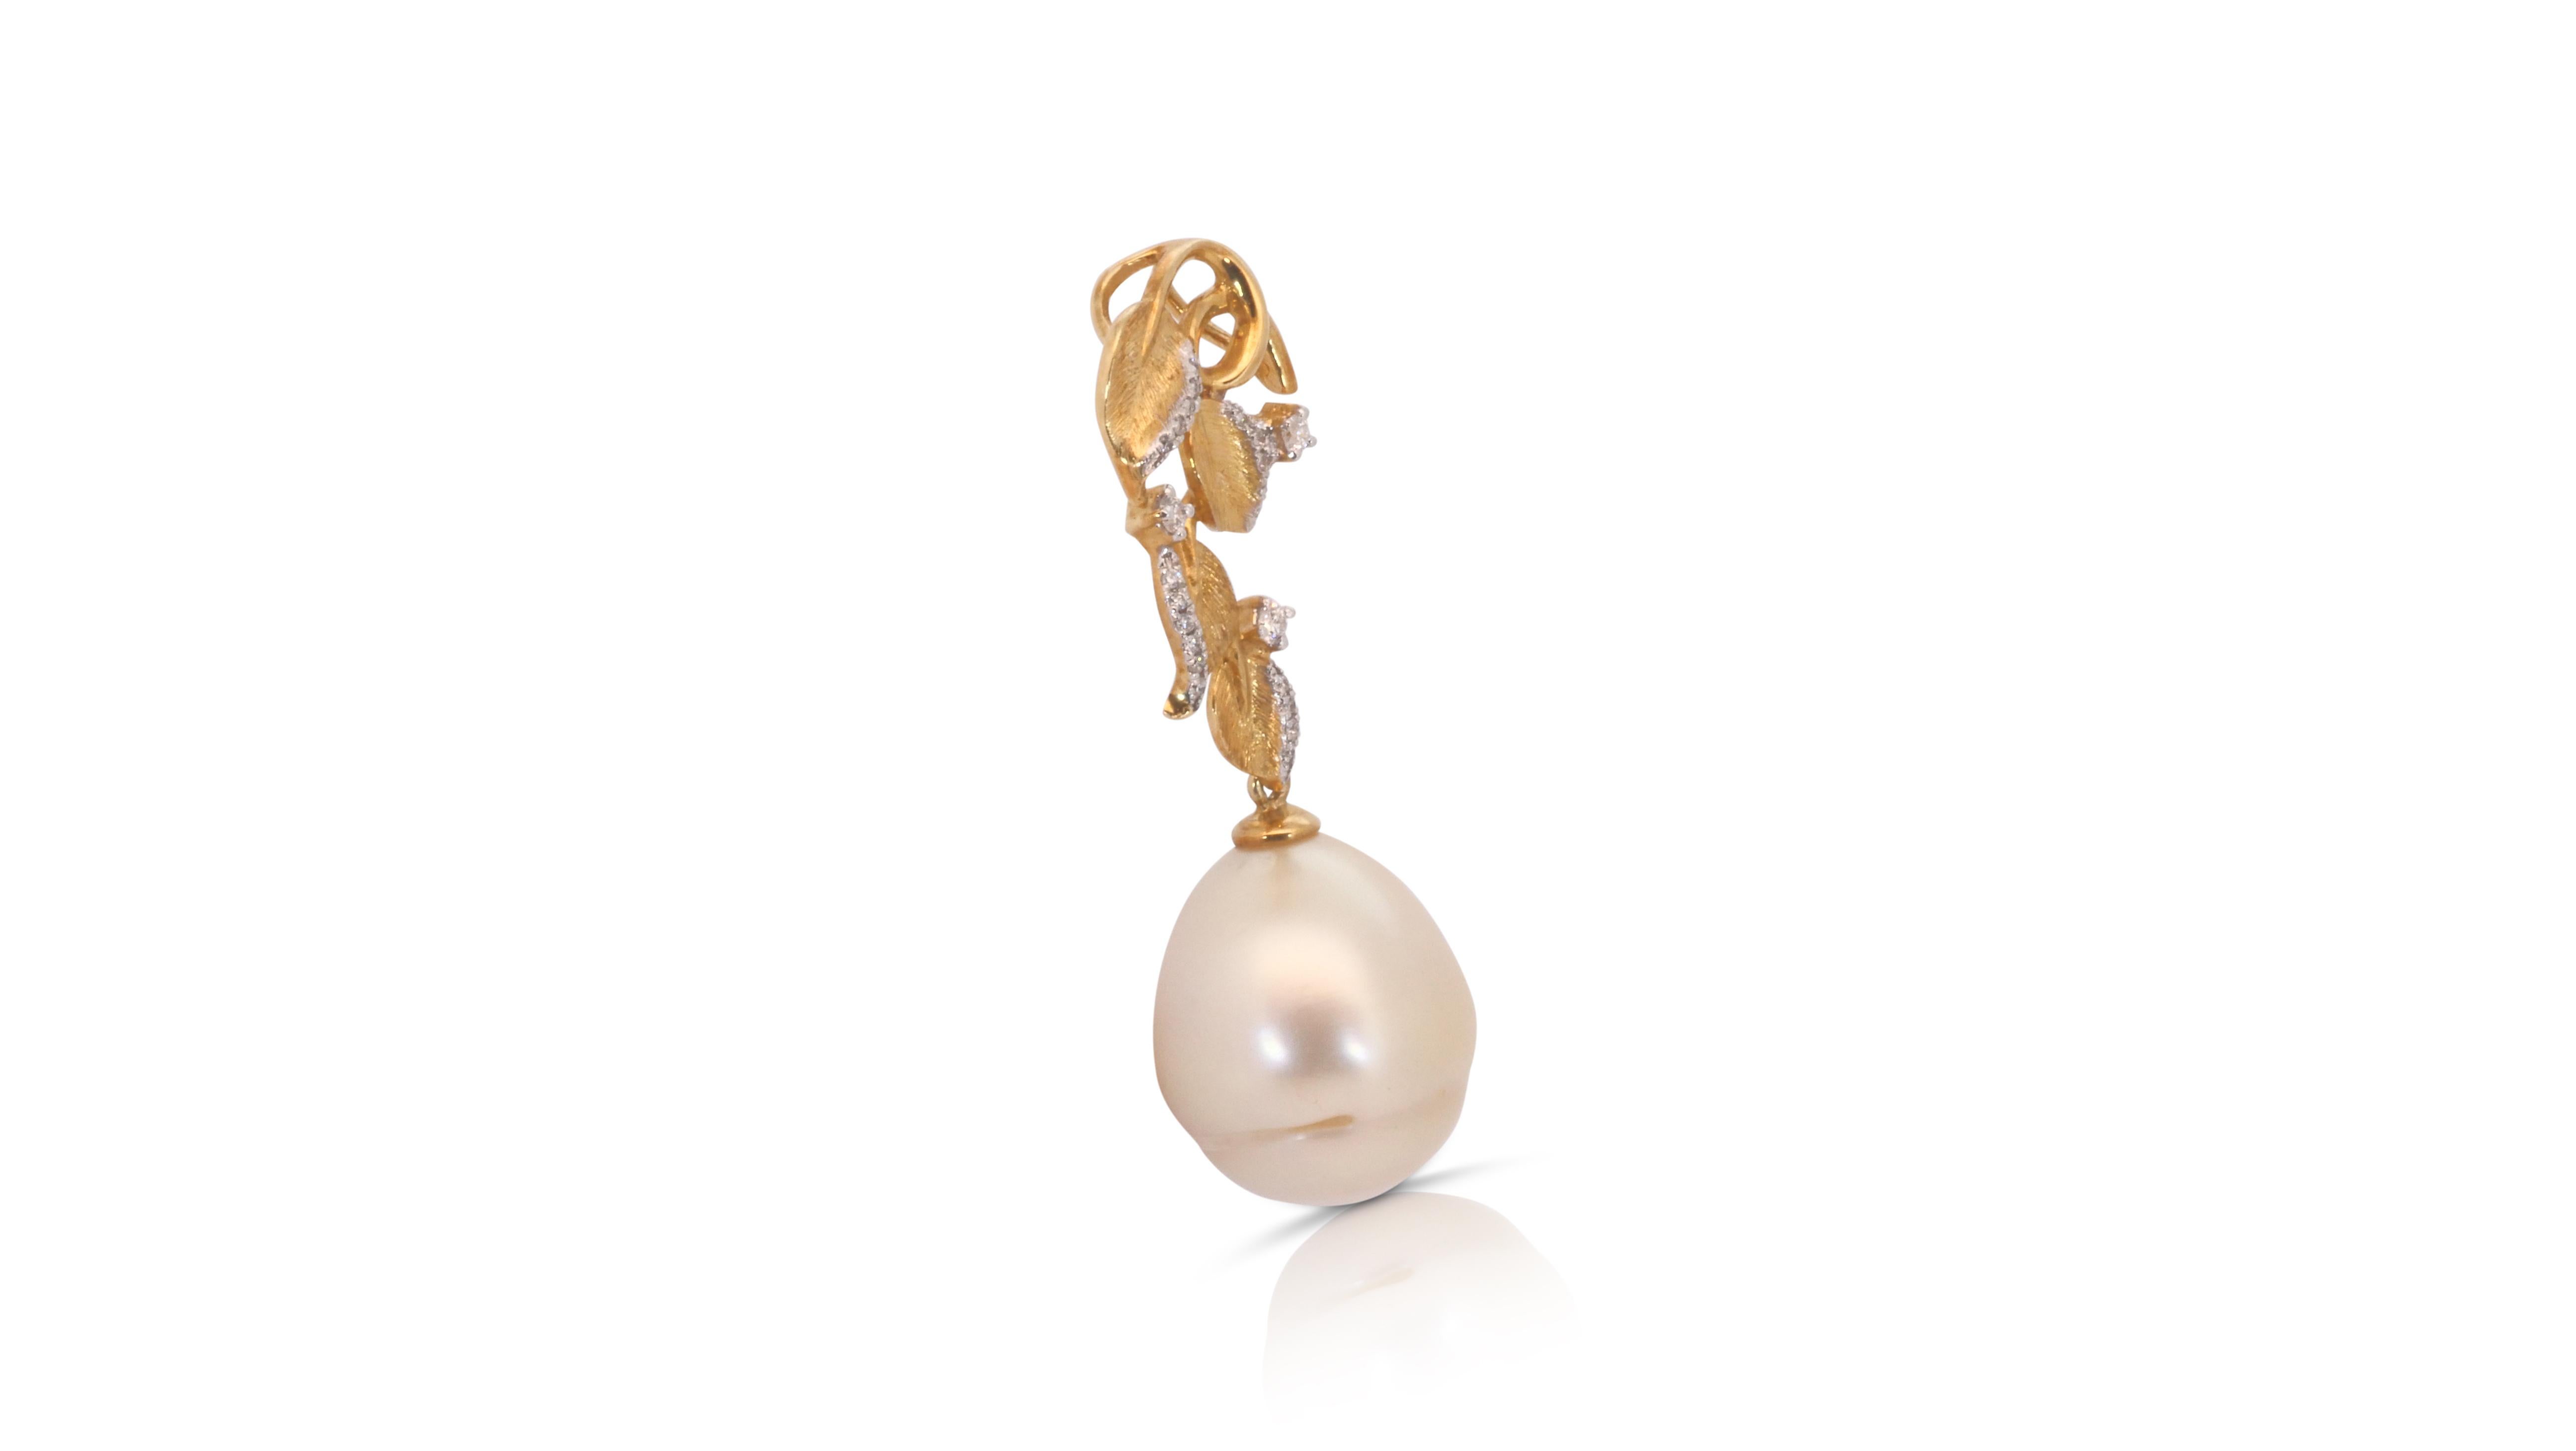 Splendid 18k Yellow Gold Pendant w/0.1 Carat Pearl & Diamonds-Chain not included For Sale 3